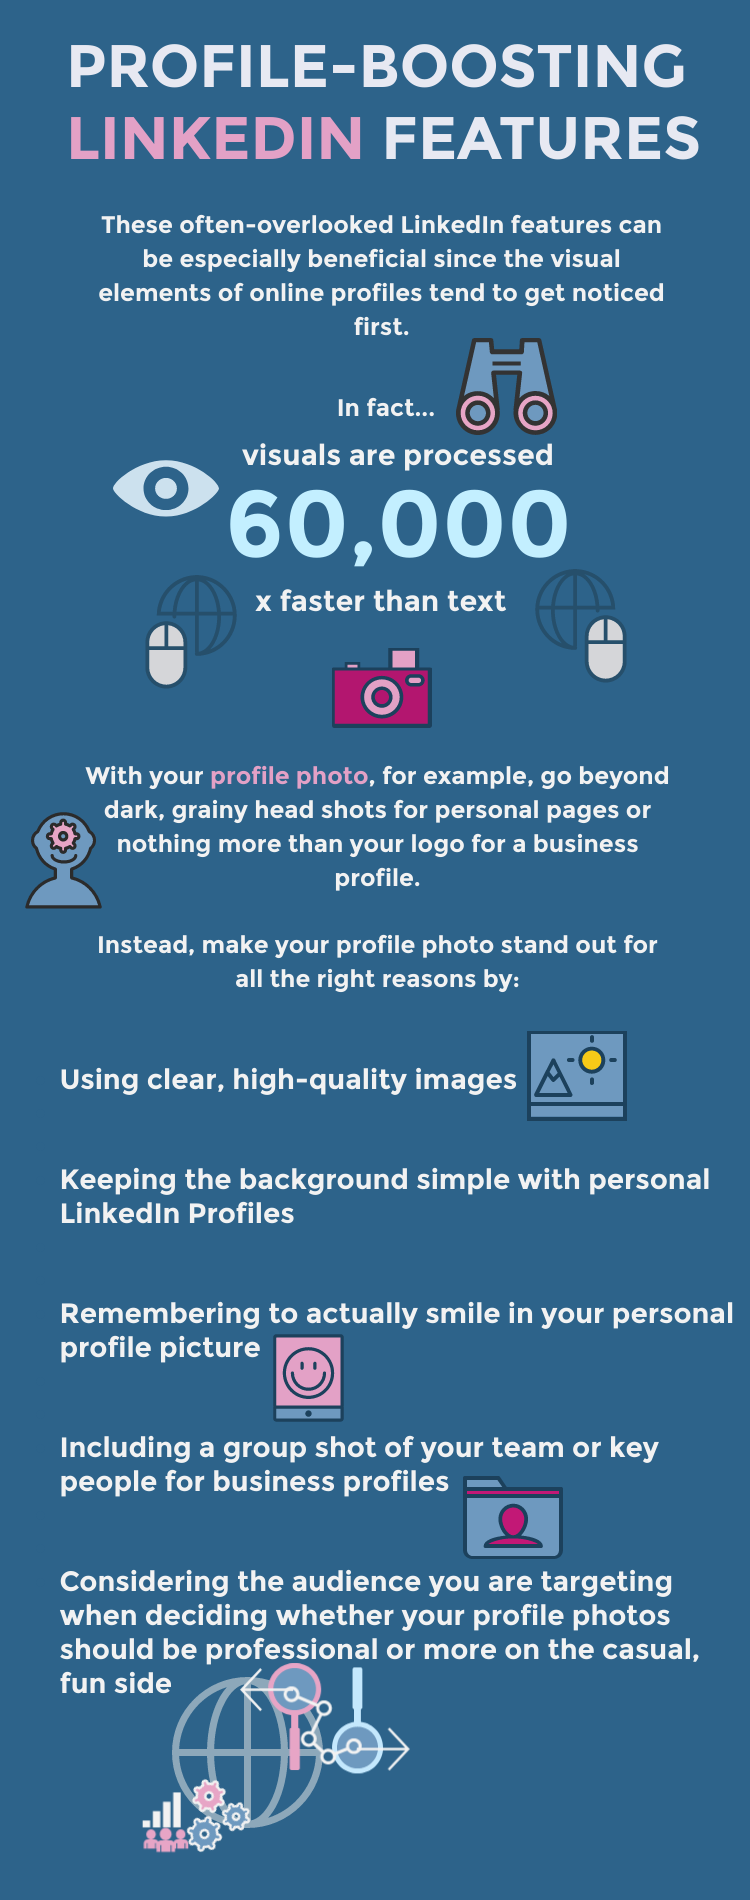 These often-overlooked LinkedIn features can be especially beneficial since the visual elements of online profiles tend to get noticed first. In fact, the human brain processes images roughly 60,000 times faster than text!

With your profile photo, for example, go beyond dark, grainy headshots for personal pages or nothing more than your logo for a business profile. Instead, make your profile photo stand out for all the right reasons by:

Using clear, high-quality images
Keeping the background simple with personal LinkedIn profiles
Remembering to actually smile in your personal profile picture
Including a group shot of your team or key people for business profiles
Considering the audience you are targeting when deciding whether your profile photos should be professional or more on the casual, fun side